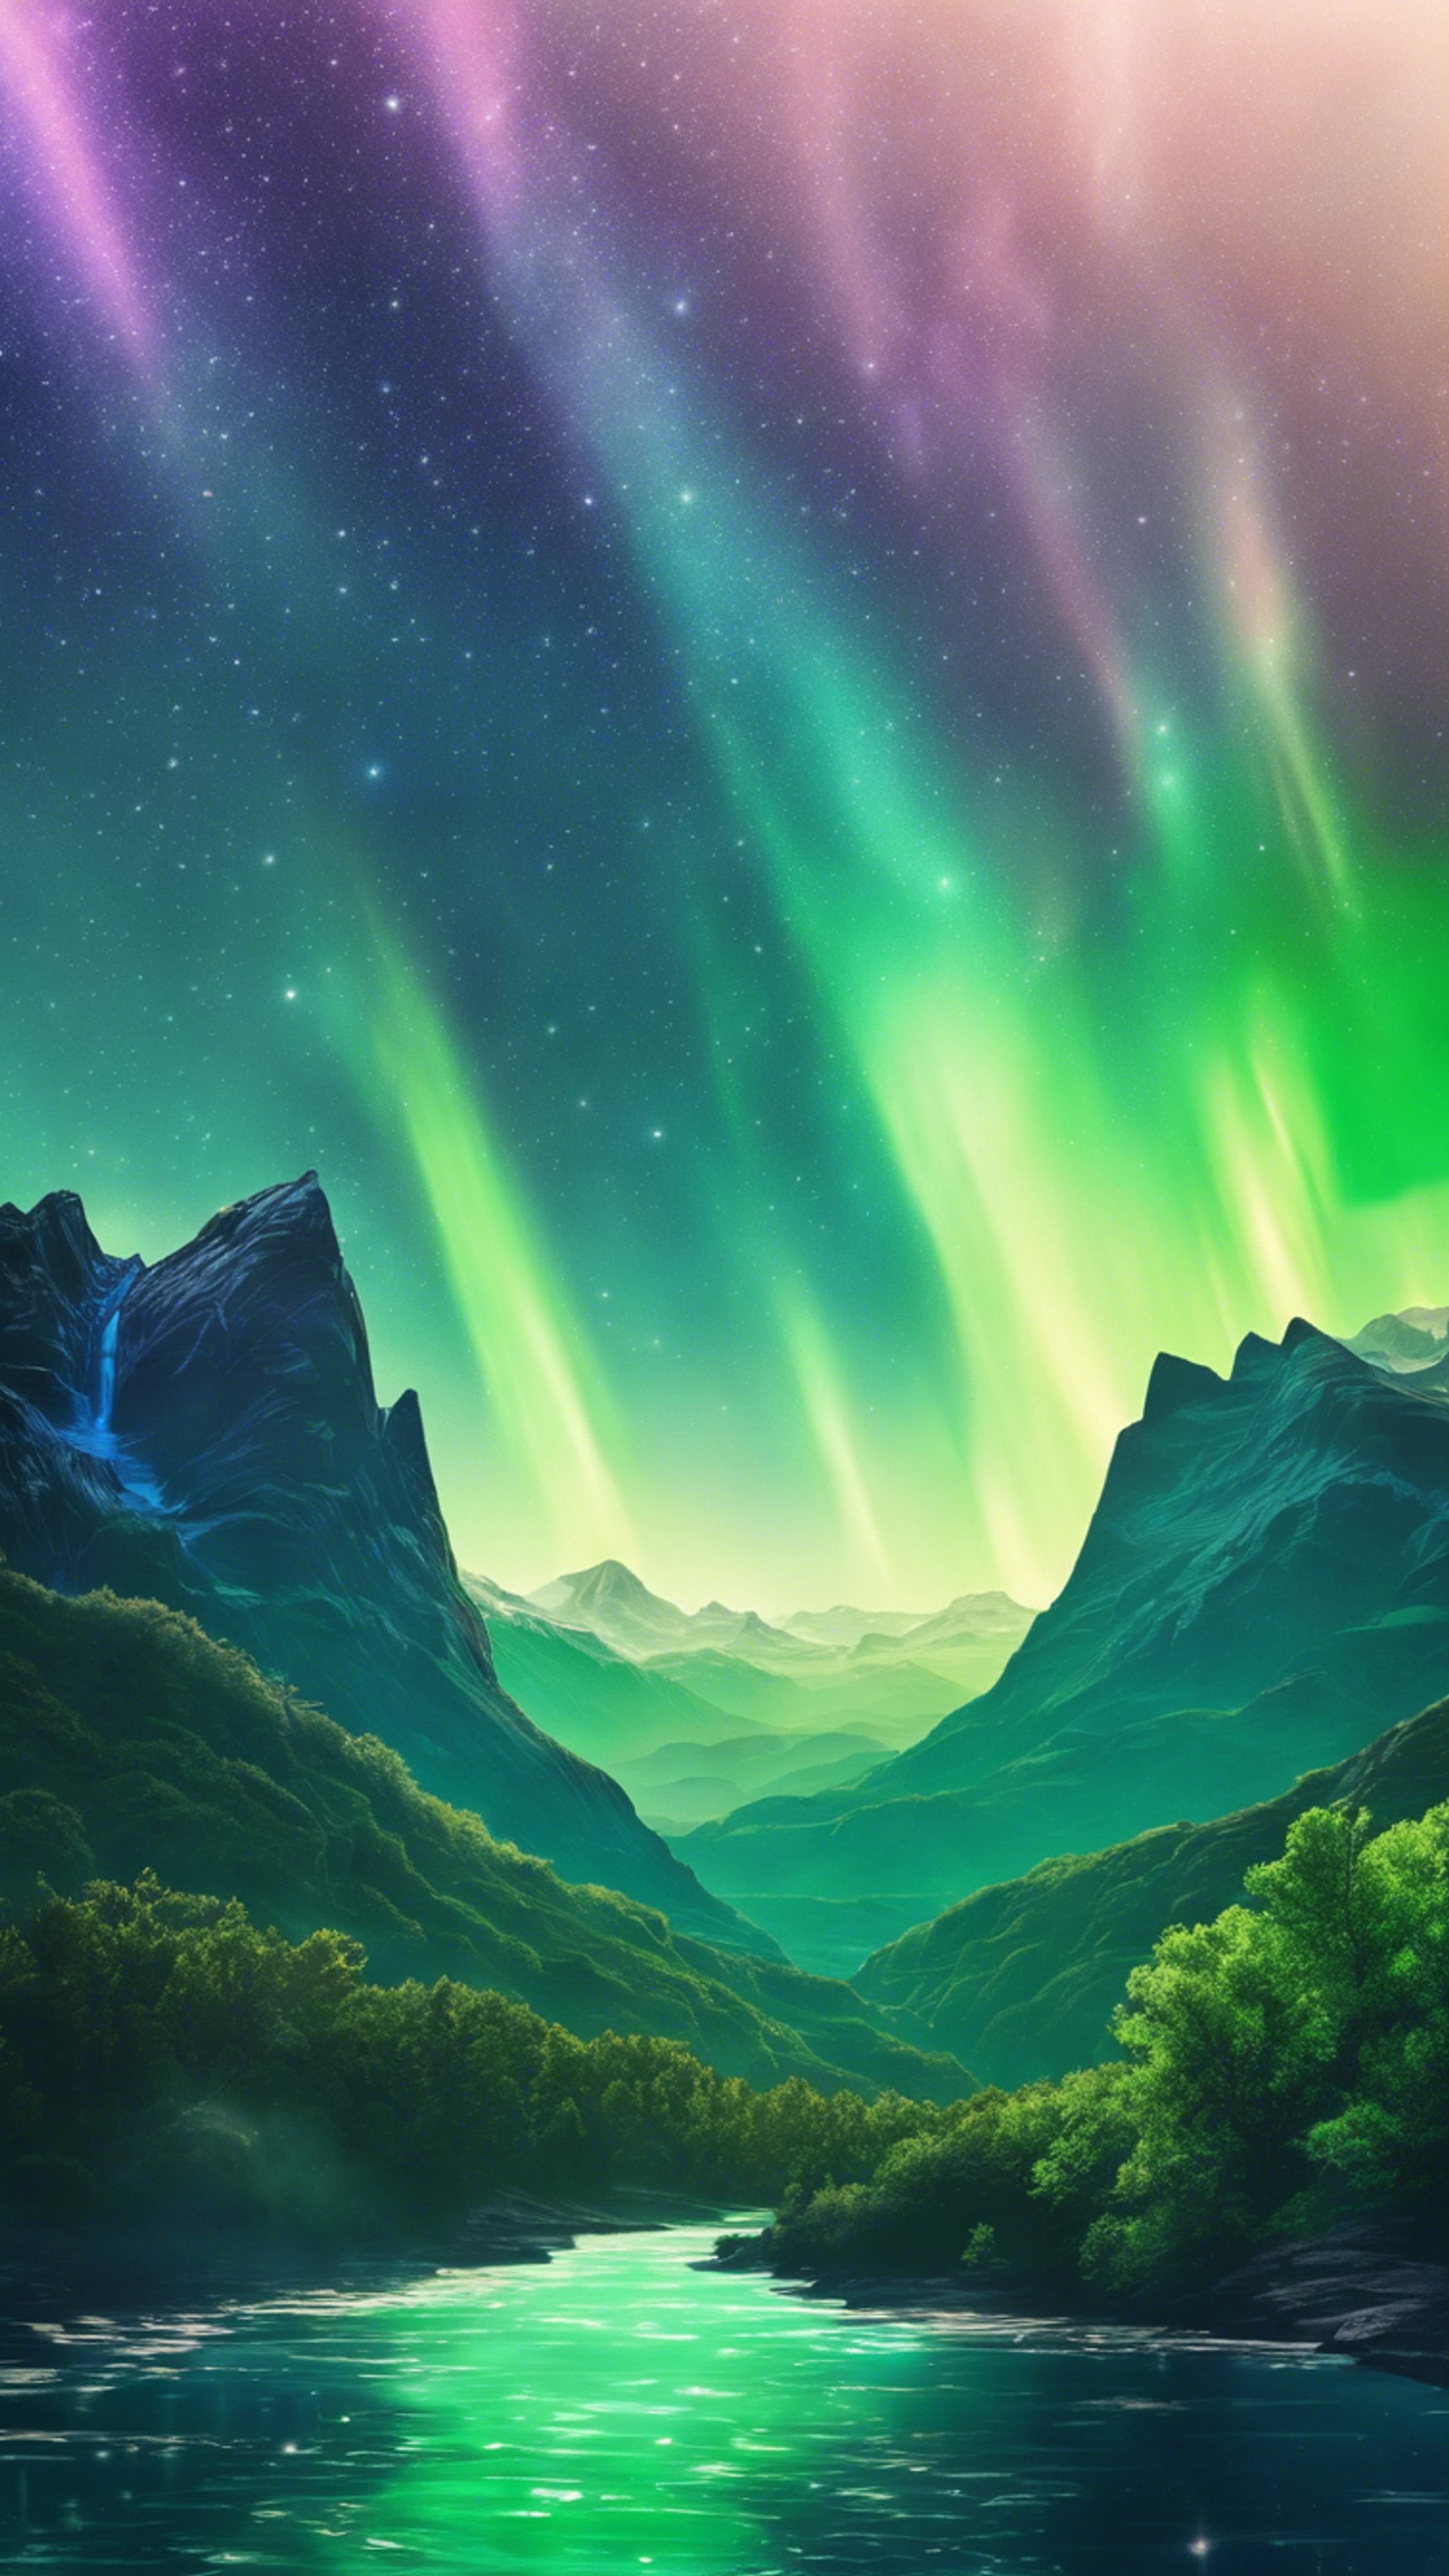 A scenic view of cool blue mountains under a sea of emerald green Northern Lights.壁紙[004f0c03e12b4501bc8f]